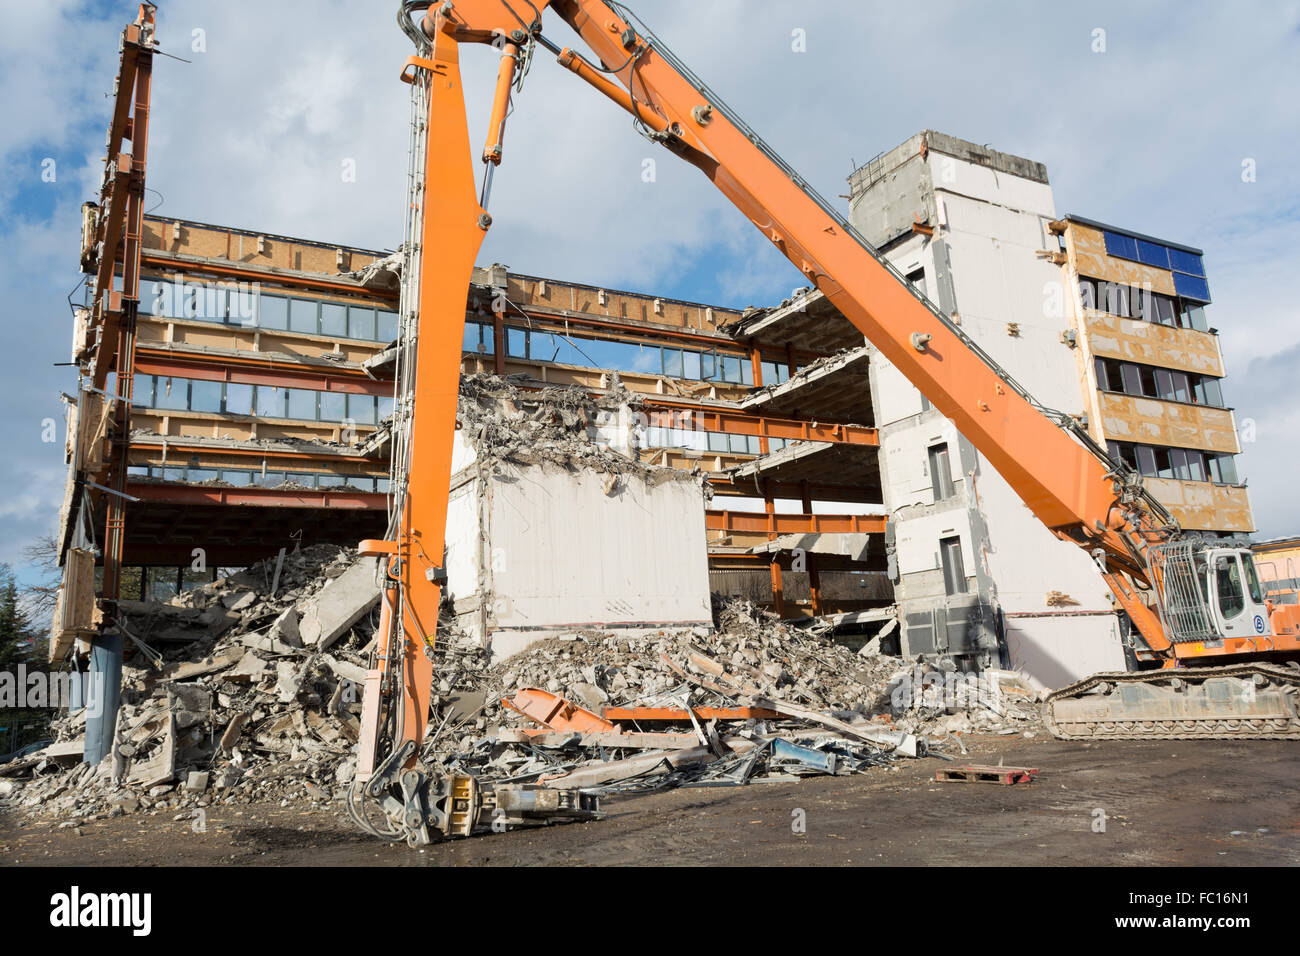 Demolition of a large residential area Stock Photo